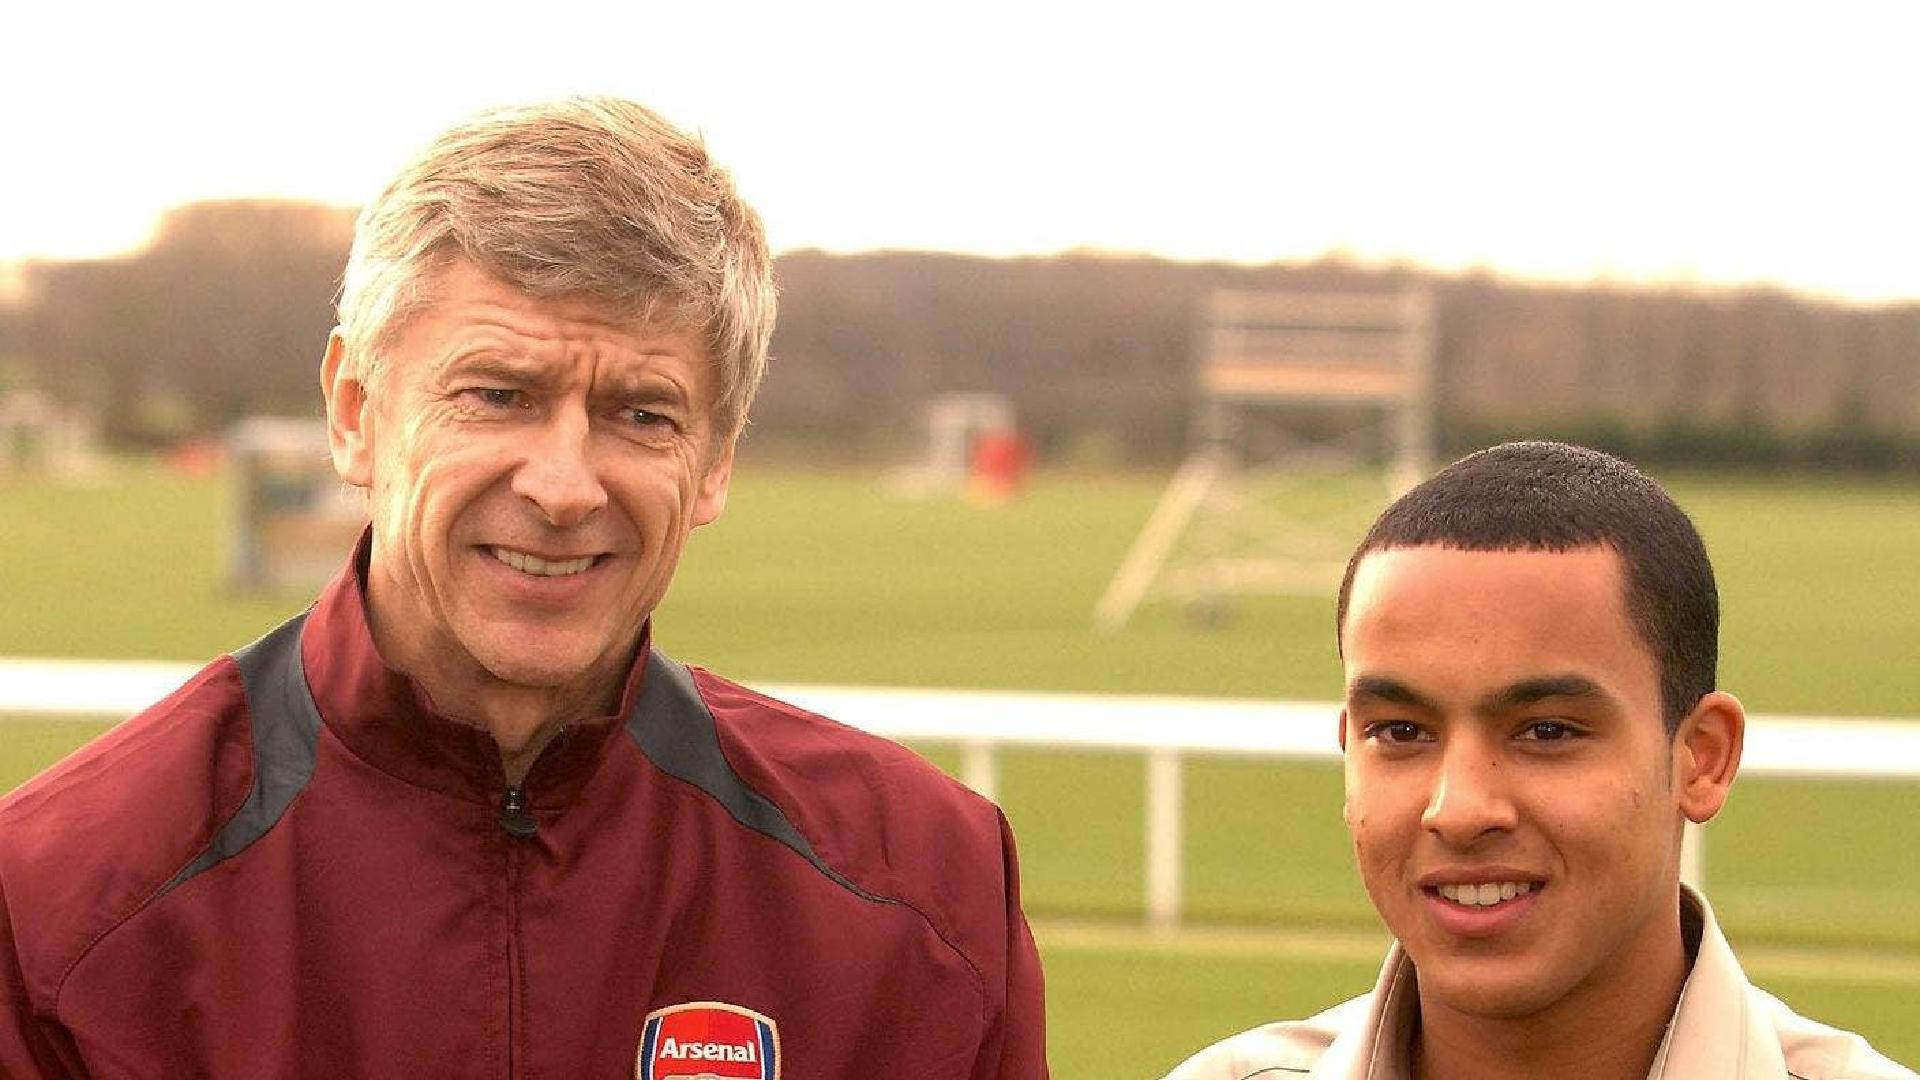 On this day in 2006: Arsenal sign 16-year-old Theo Walcott from Southampton  | beIN SPORTS